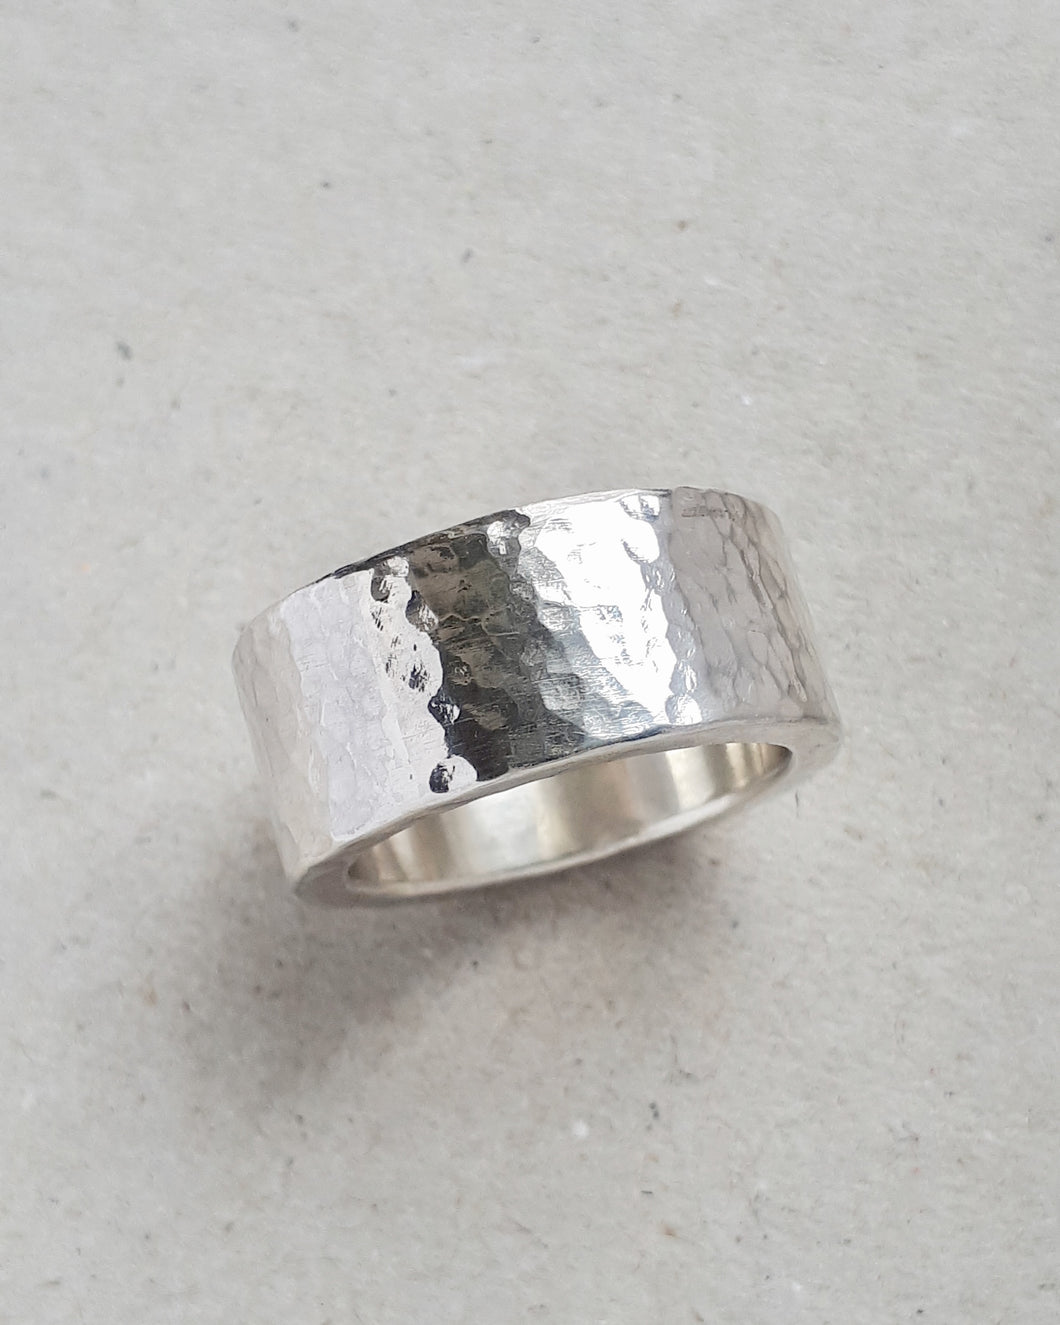 Chunky hammered sterling silver ring. Top view.